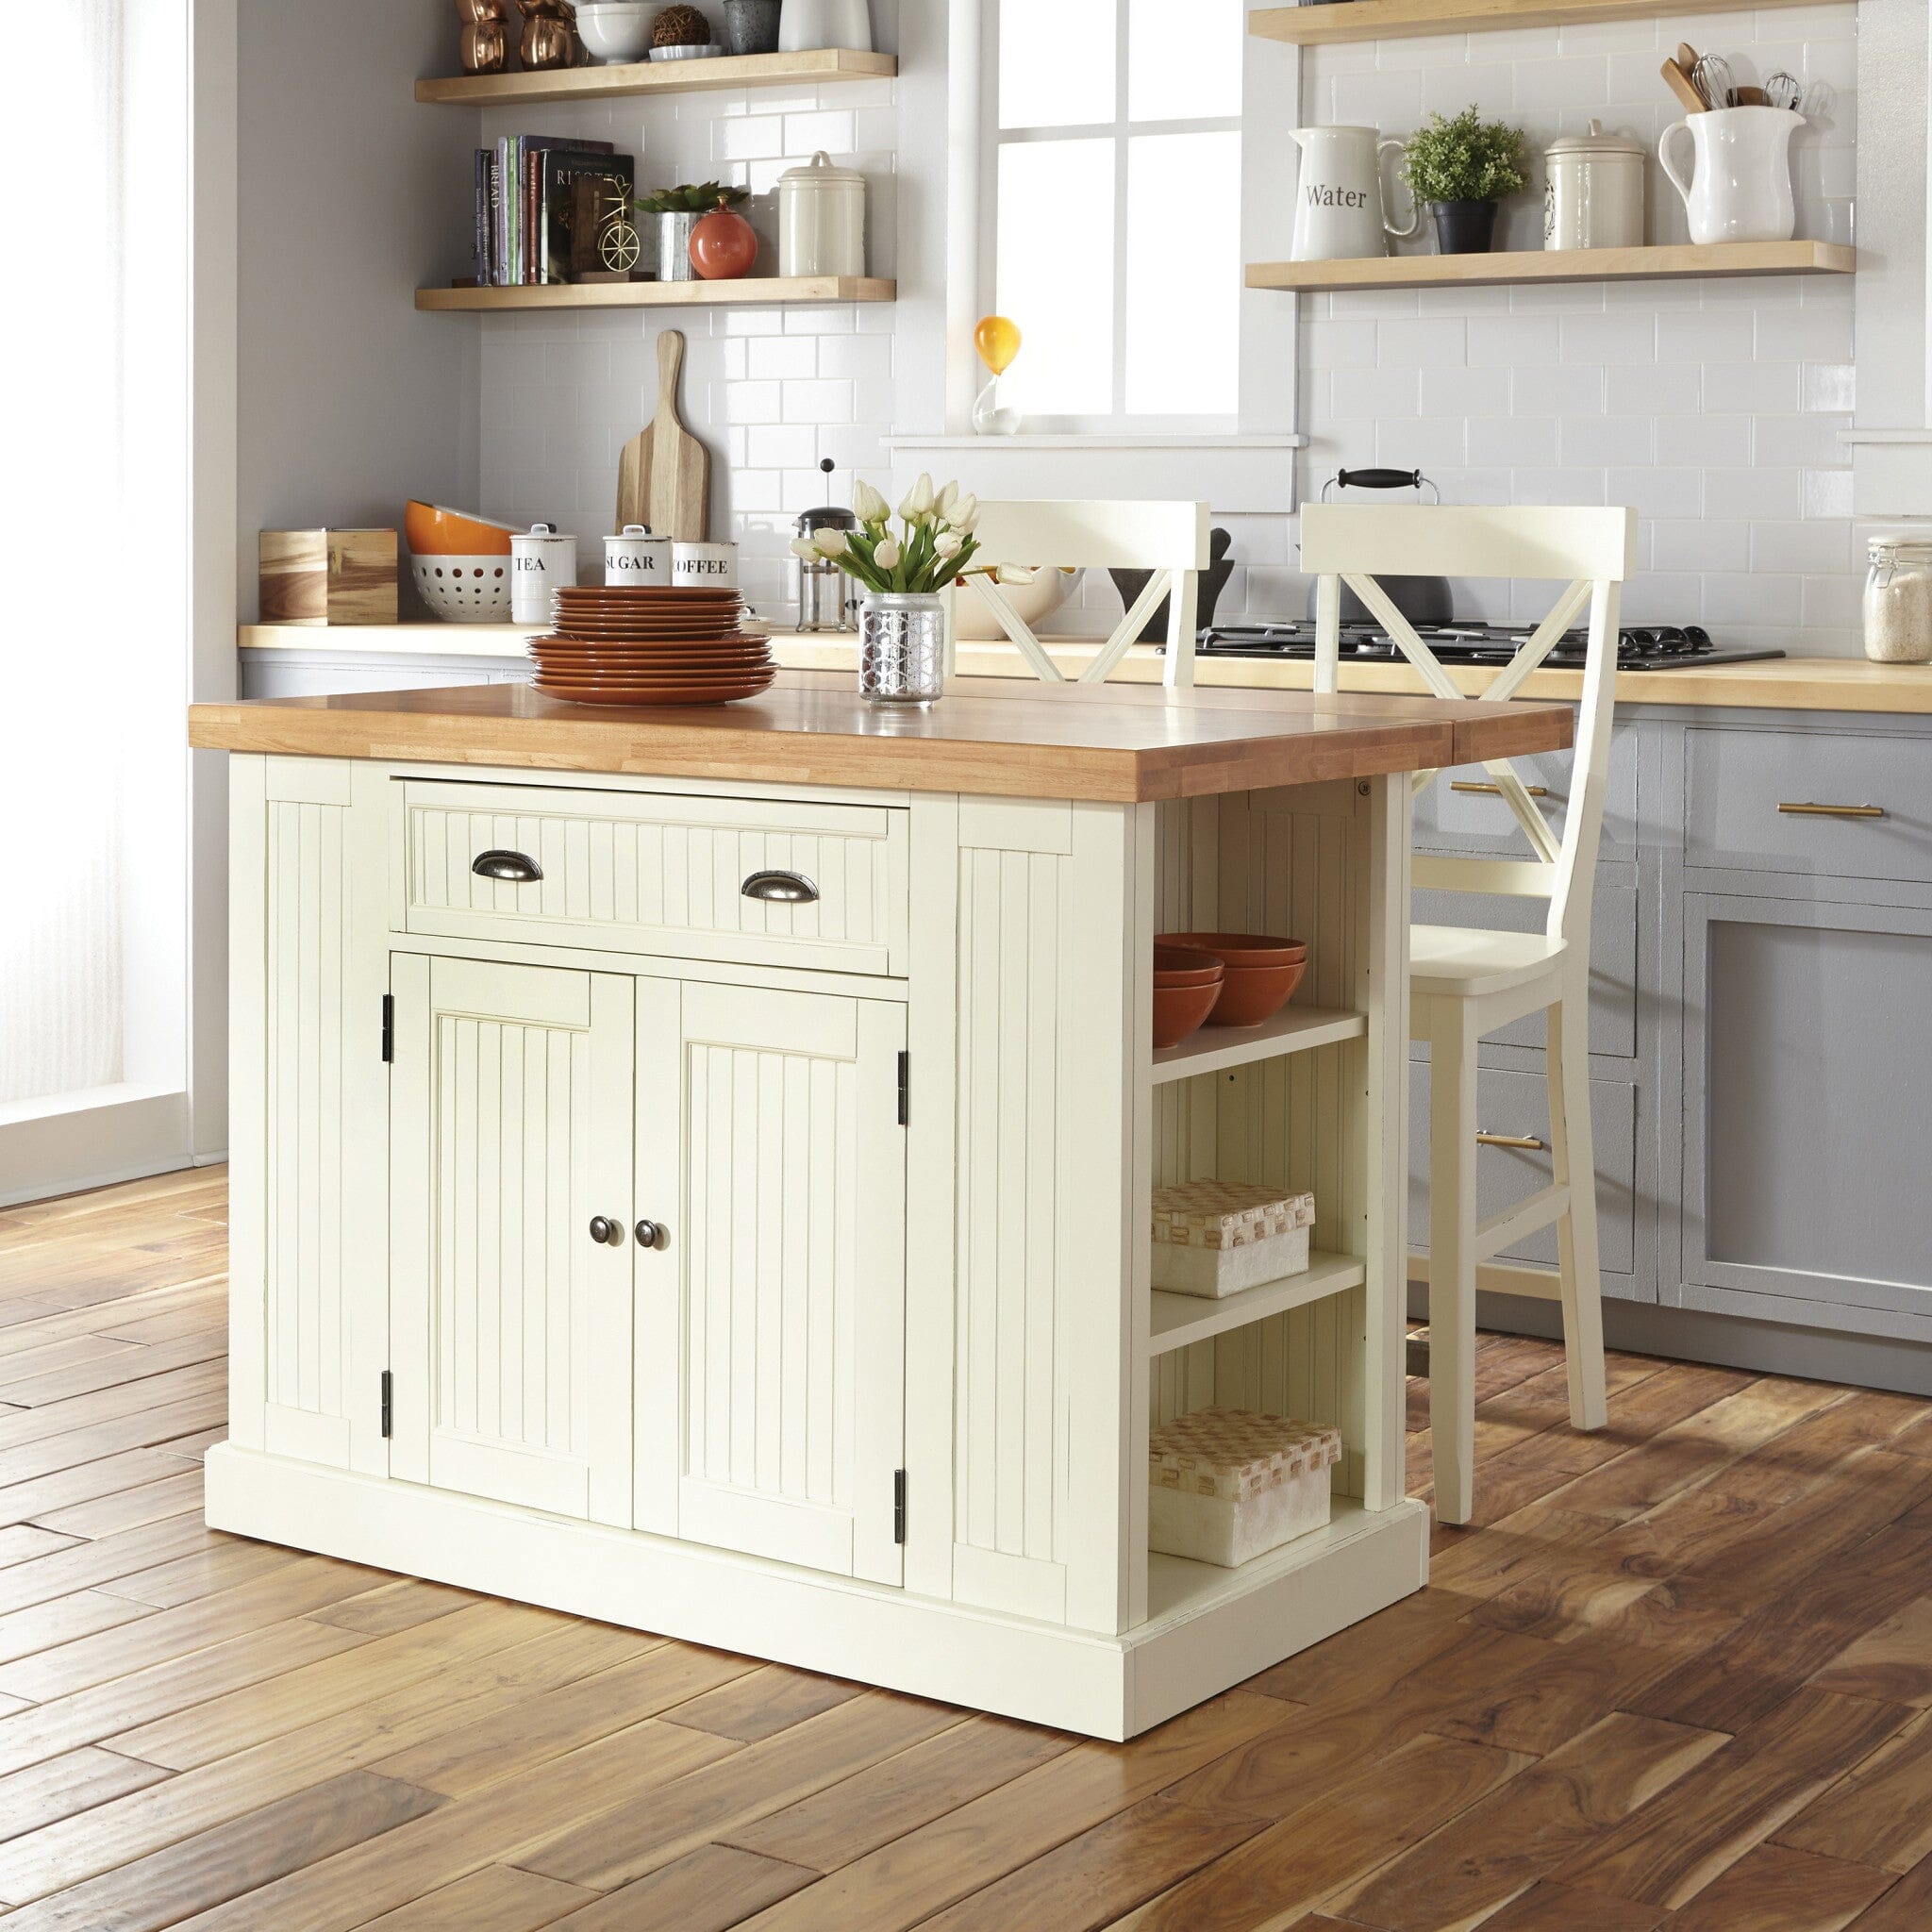 Traditional 3 Piece Kitchen Island Set By Nantucket Kitchen Island Nantucket